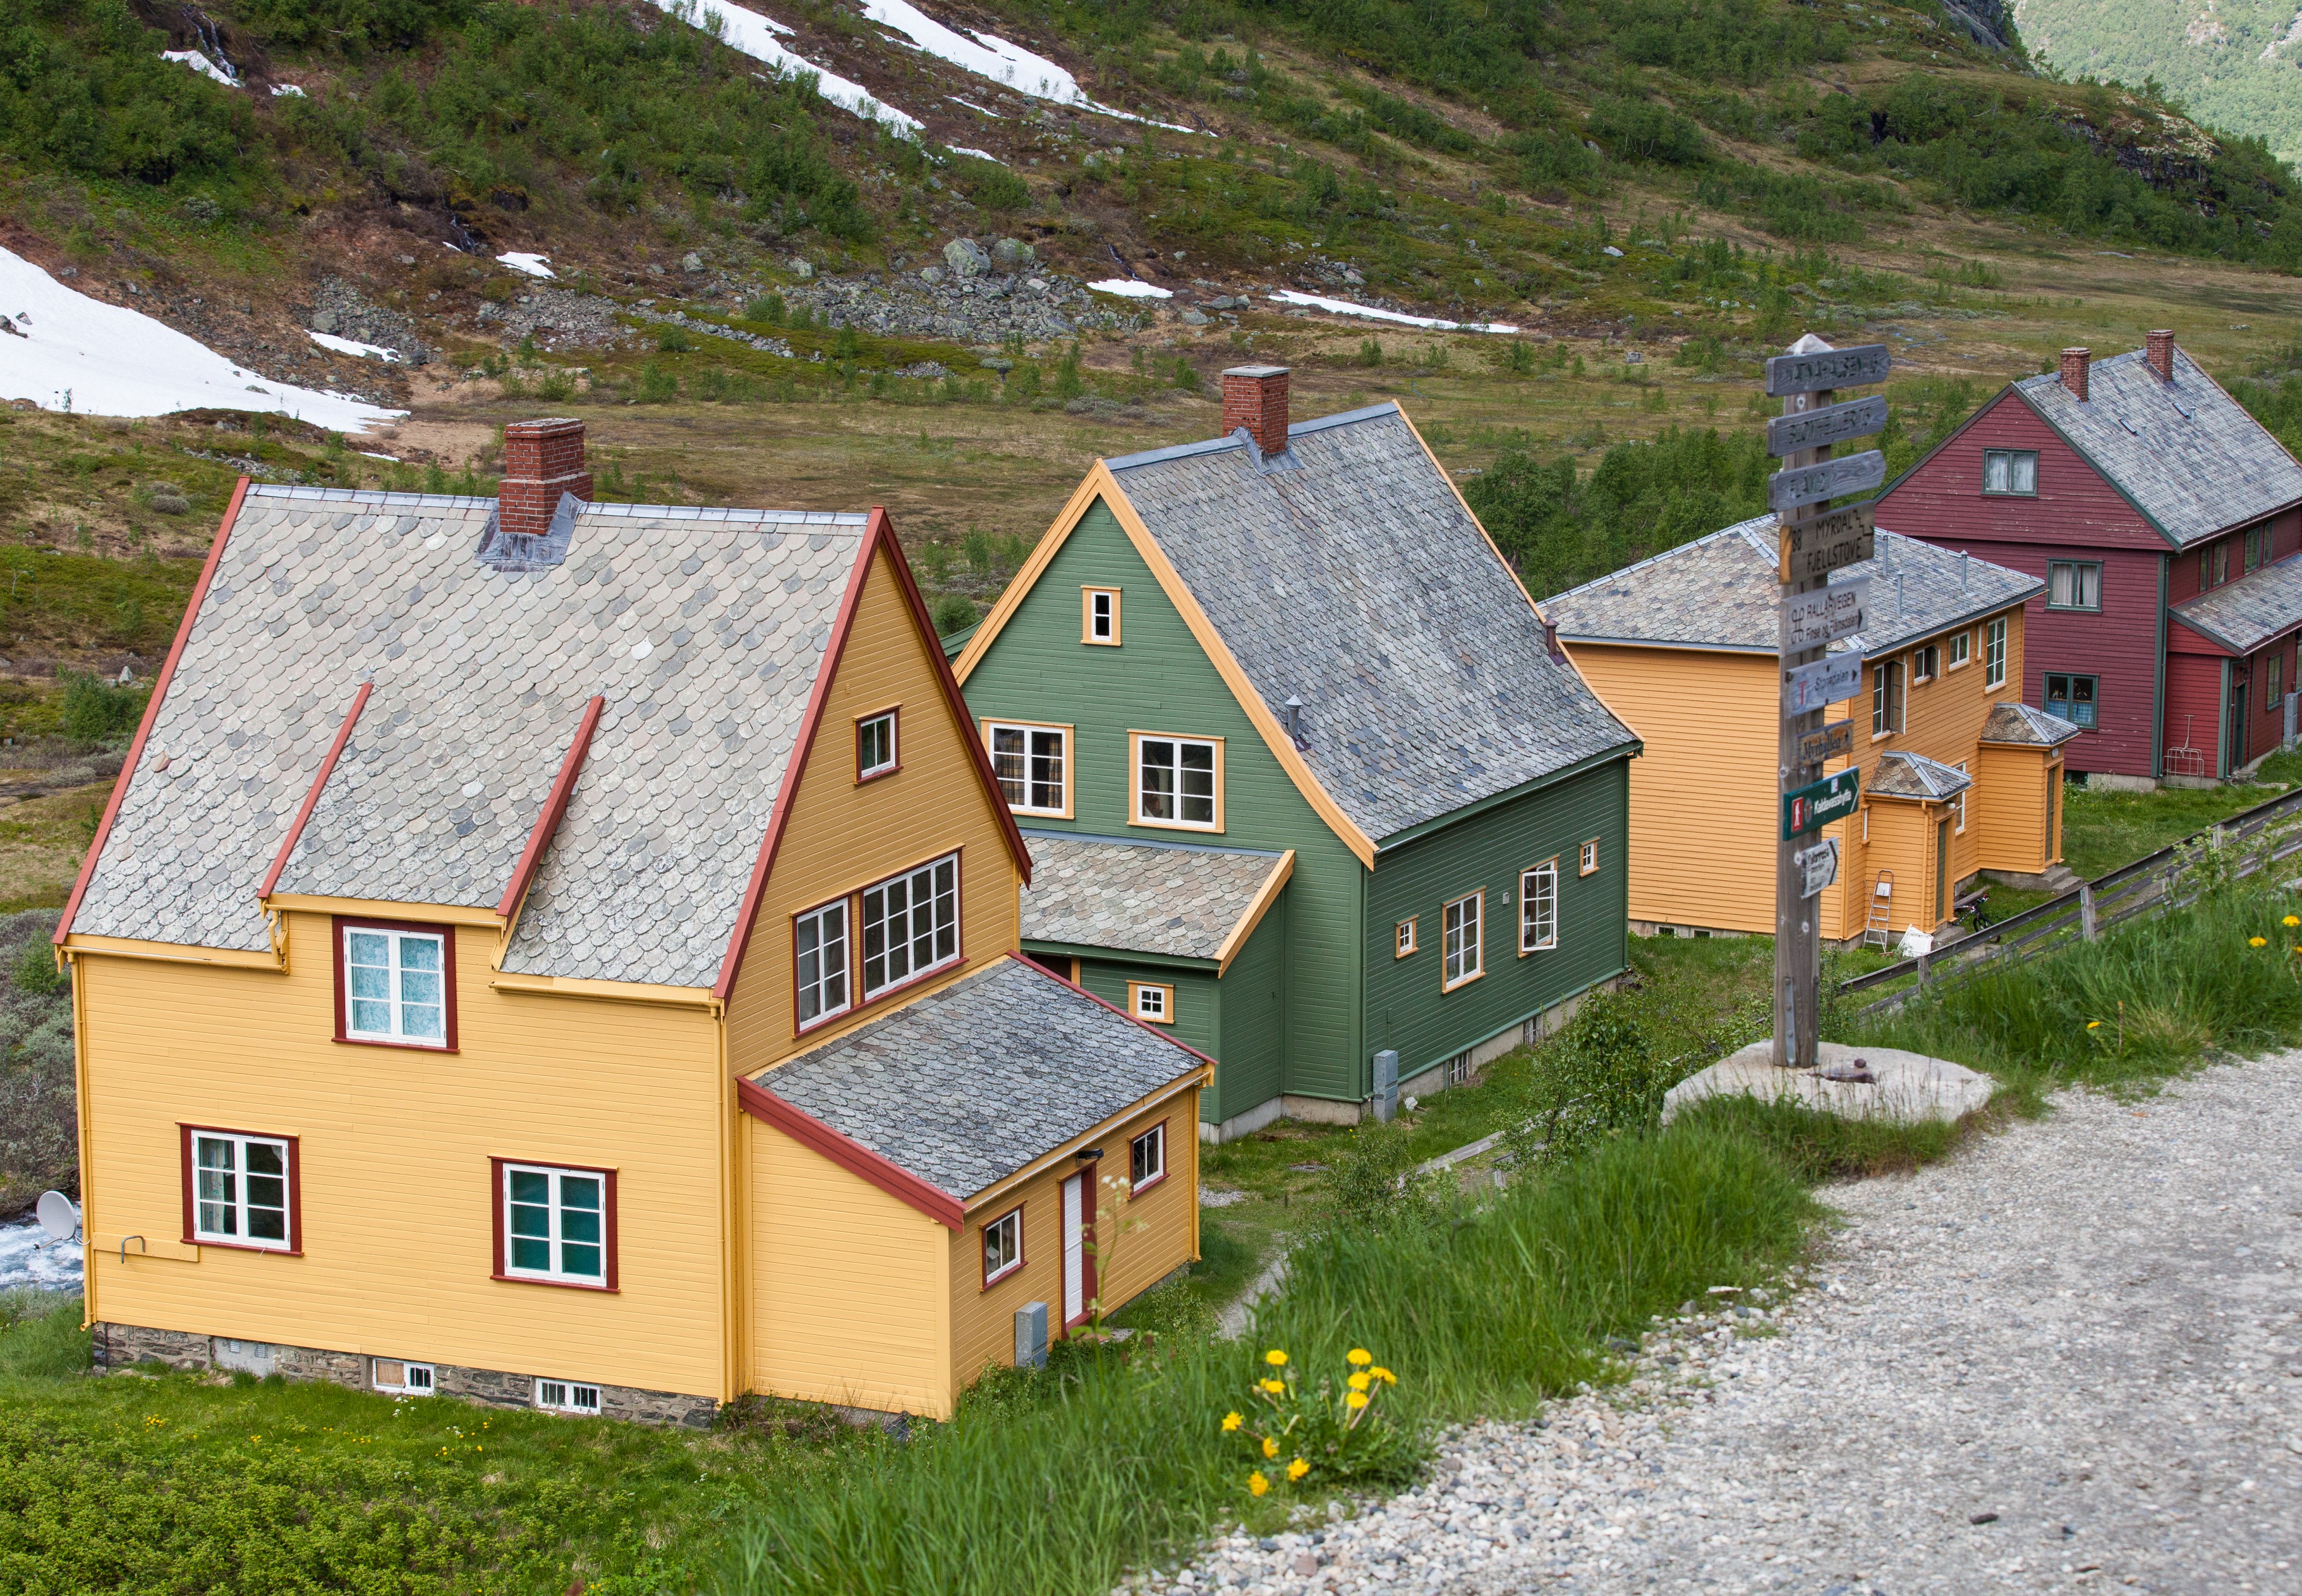 wooden houses in Norway, near Flåm, June 2014, picture 46